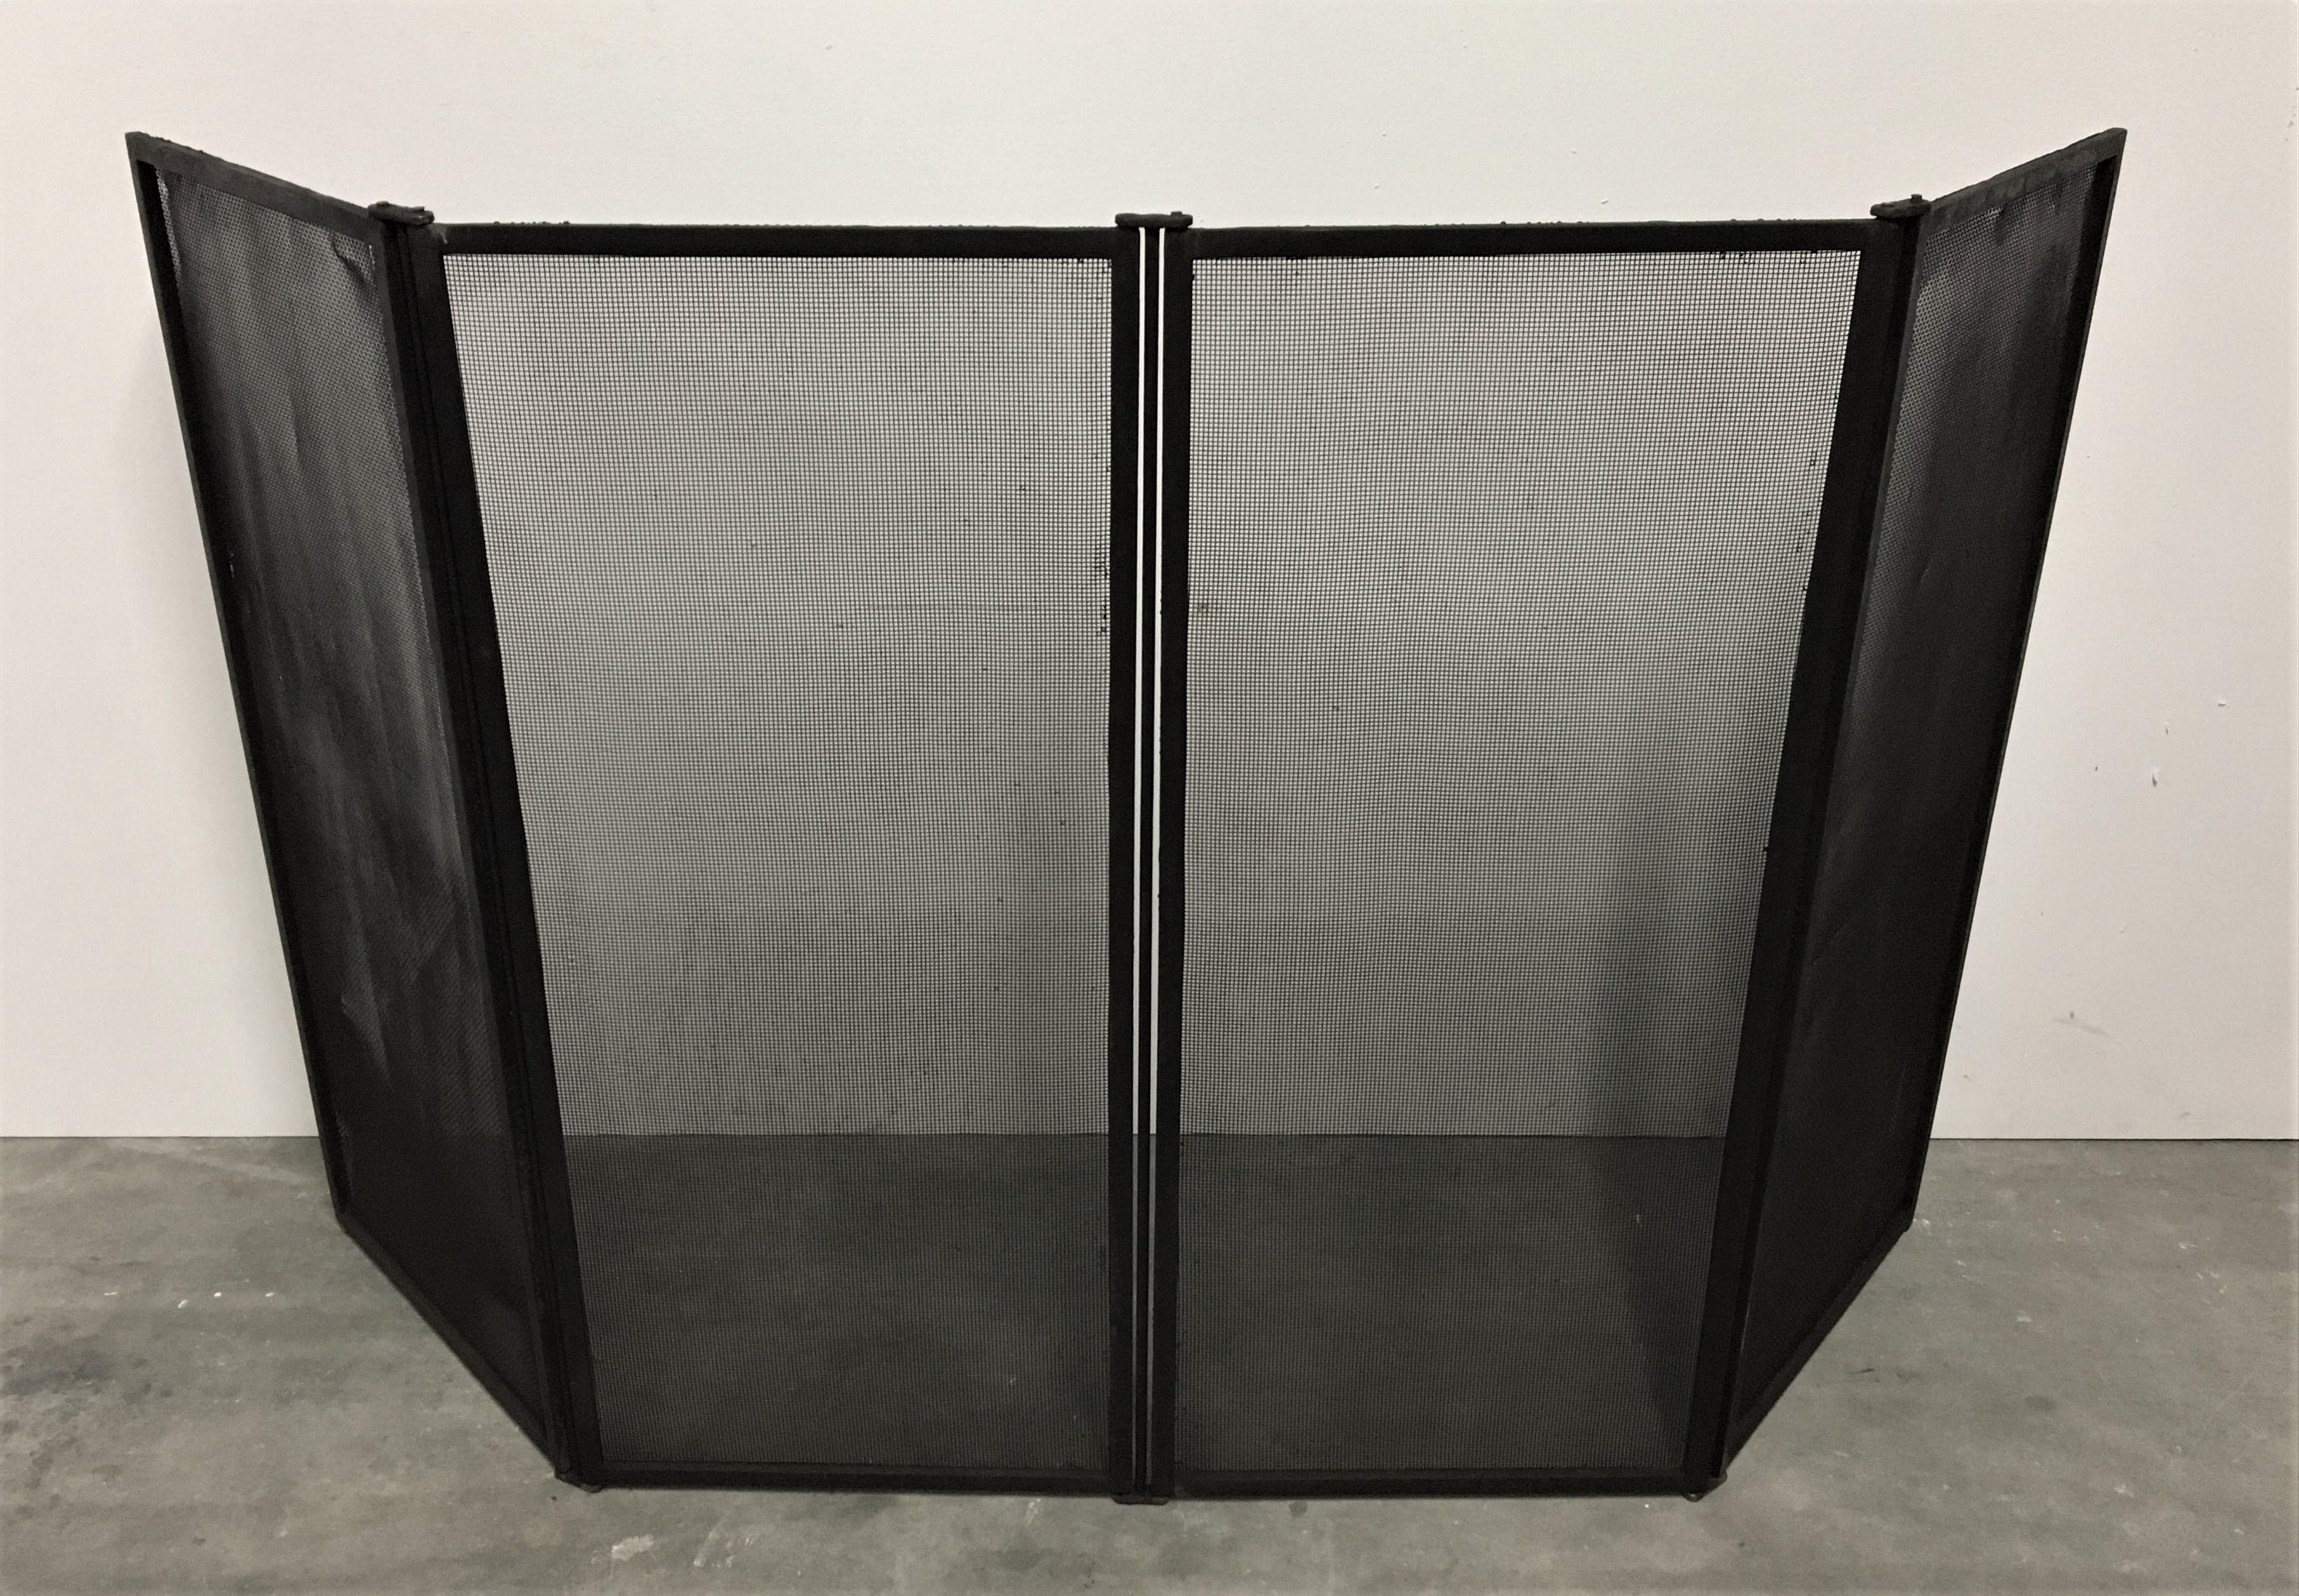 This big fireplace screen / fire screen is rare because of its size.
This is in great condition with a beautiful original patina, thanks to the 4 panels the screen can be used in a range of widths to fit your fireplace. 

Our vast collection of